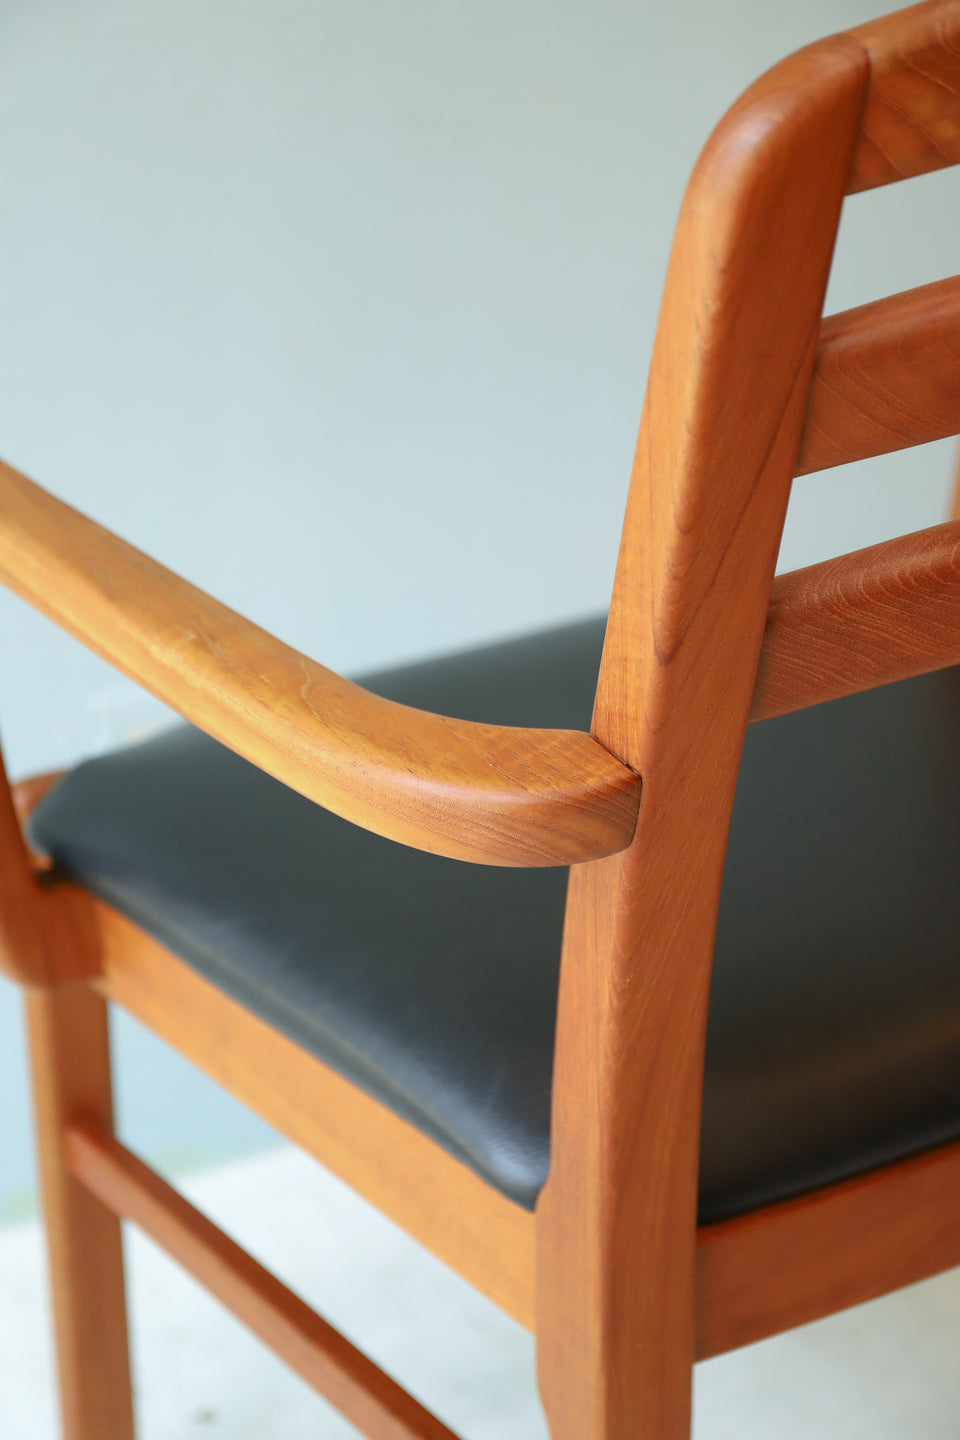 Danish Vintage Teakwood Arm Chair/デンマークヴィンテージ アームチェア チーク材